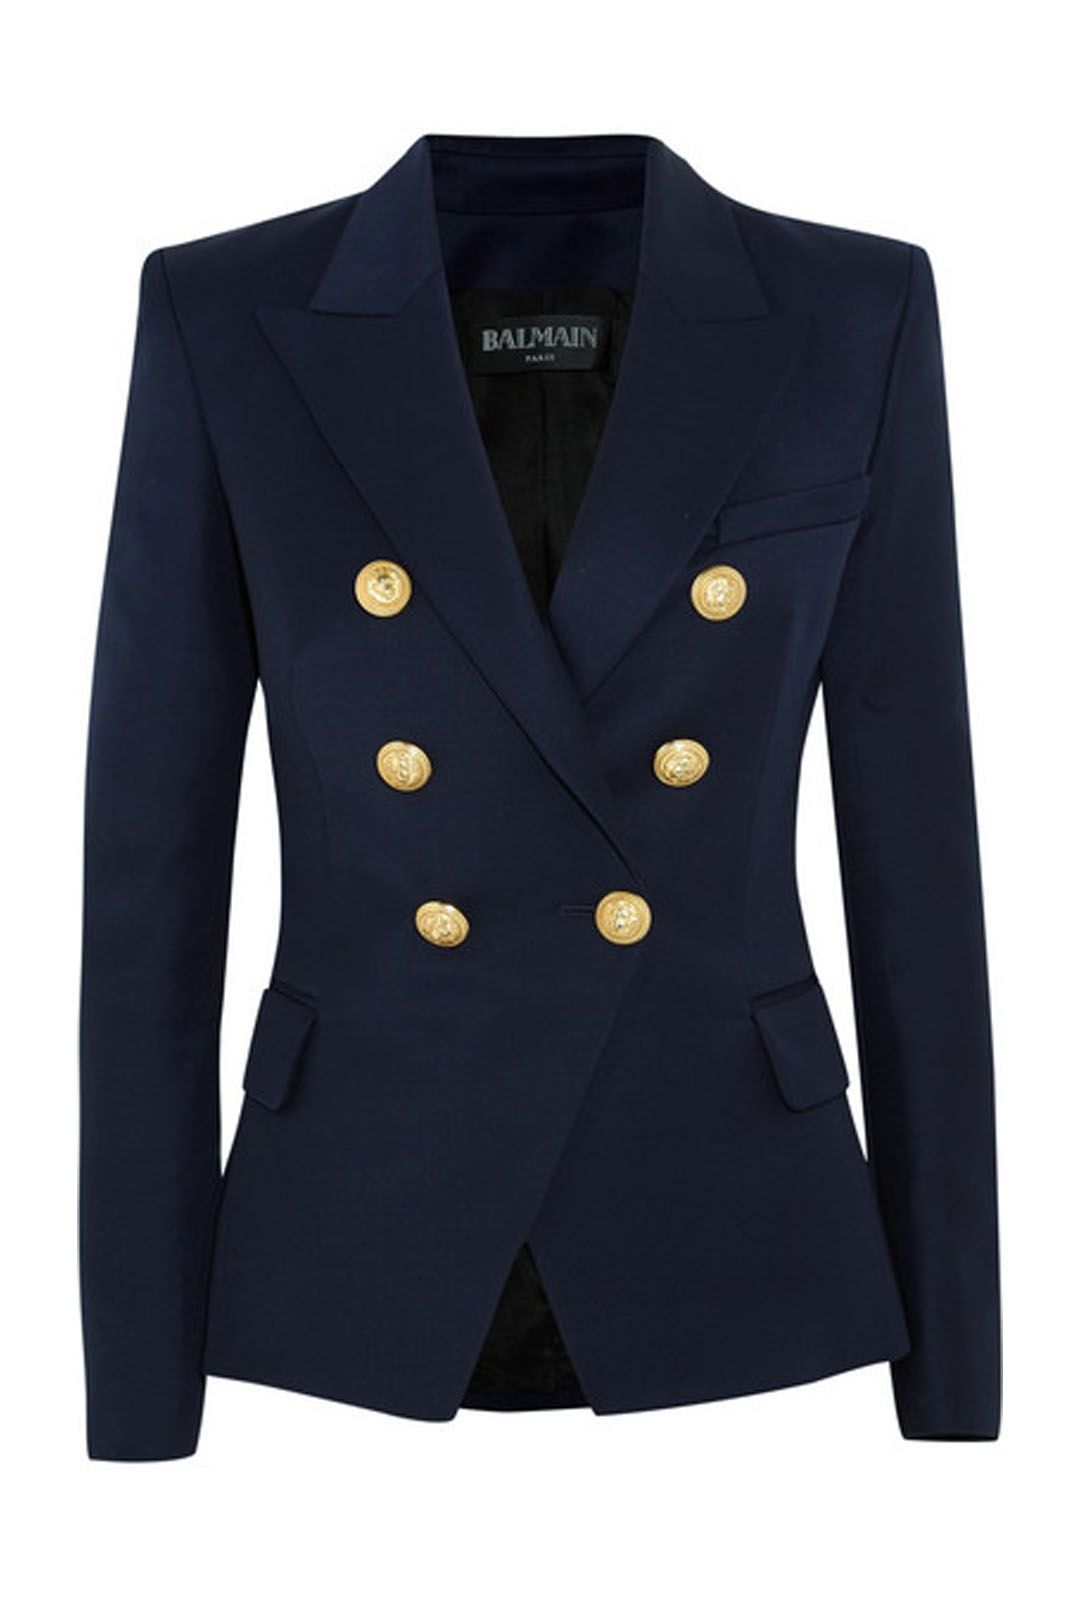 Balmain - Double-Breasted Wool - Twill Blazer - Navy - Front